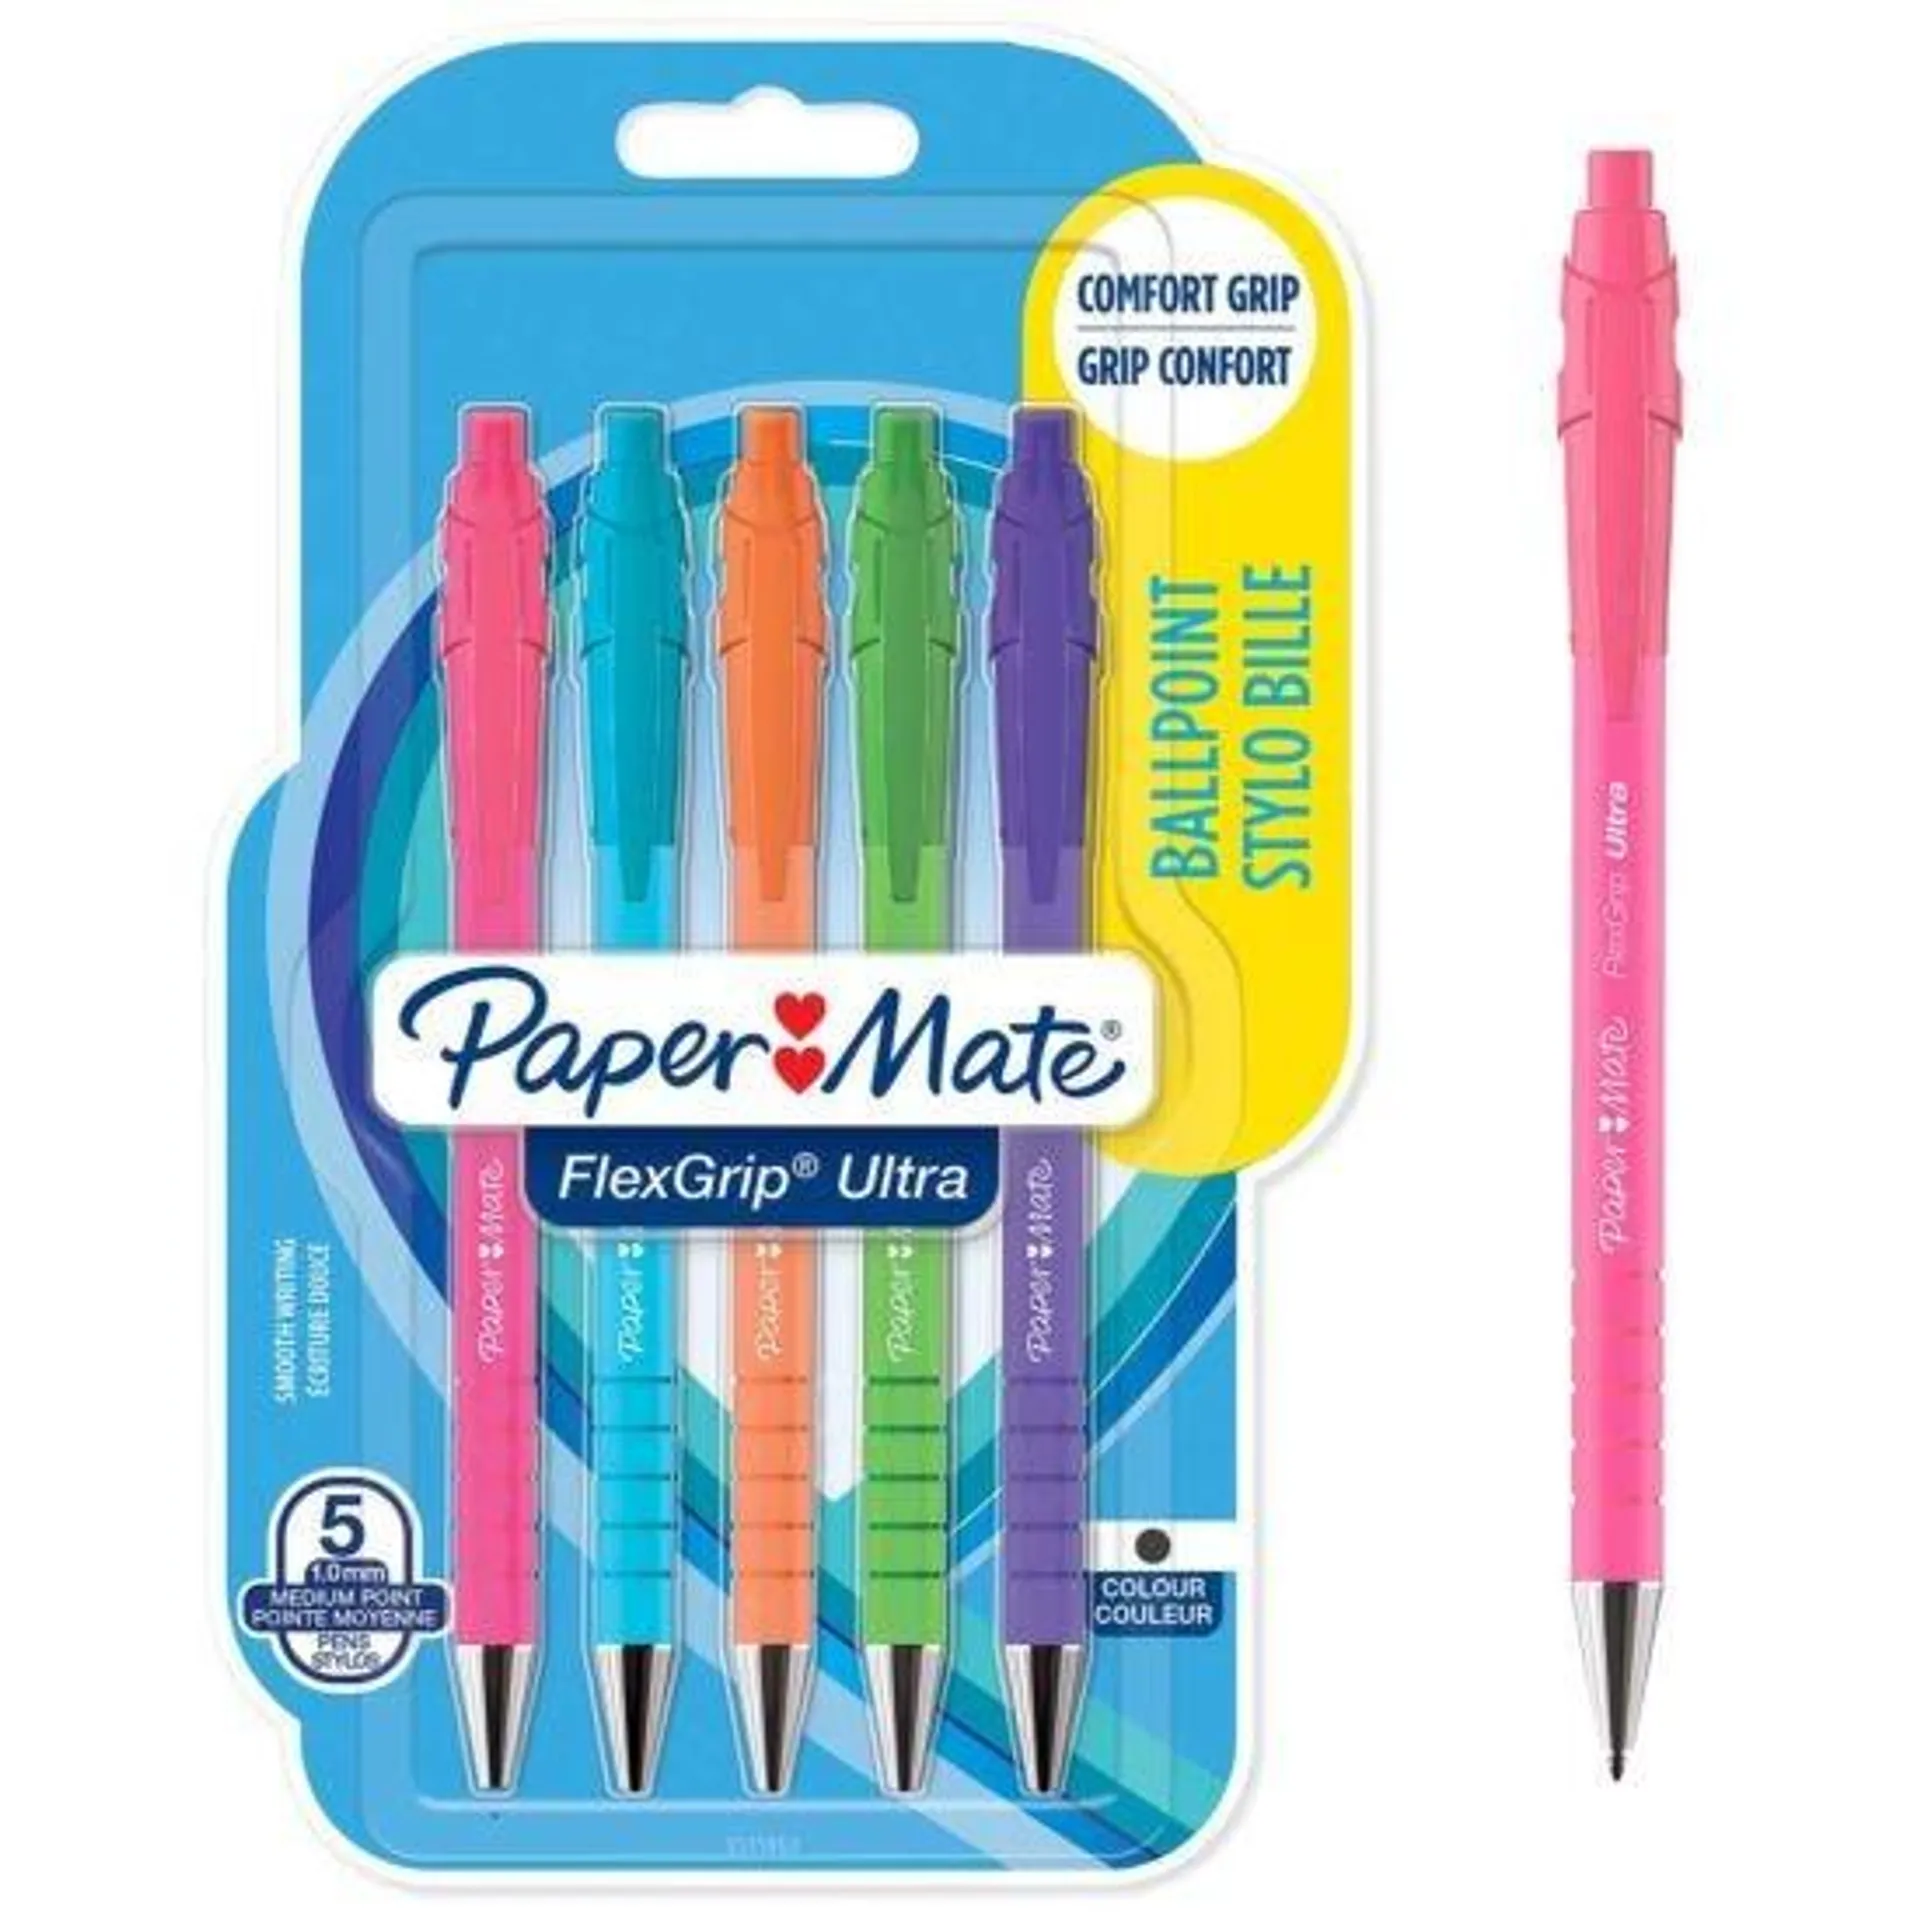 Papermate FlexGrip Ultra Brights Ballpoint Pens Pack of 5 Black Ink